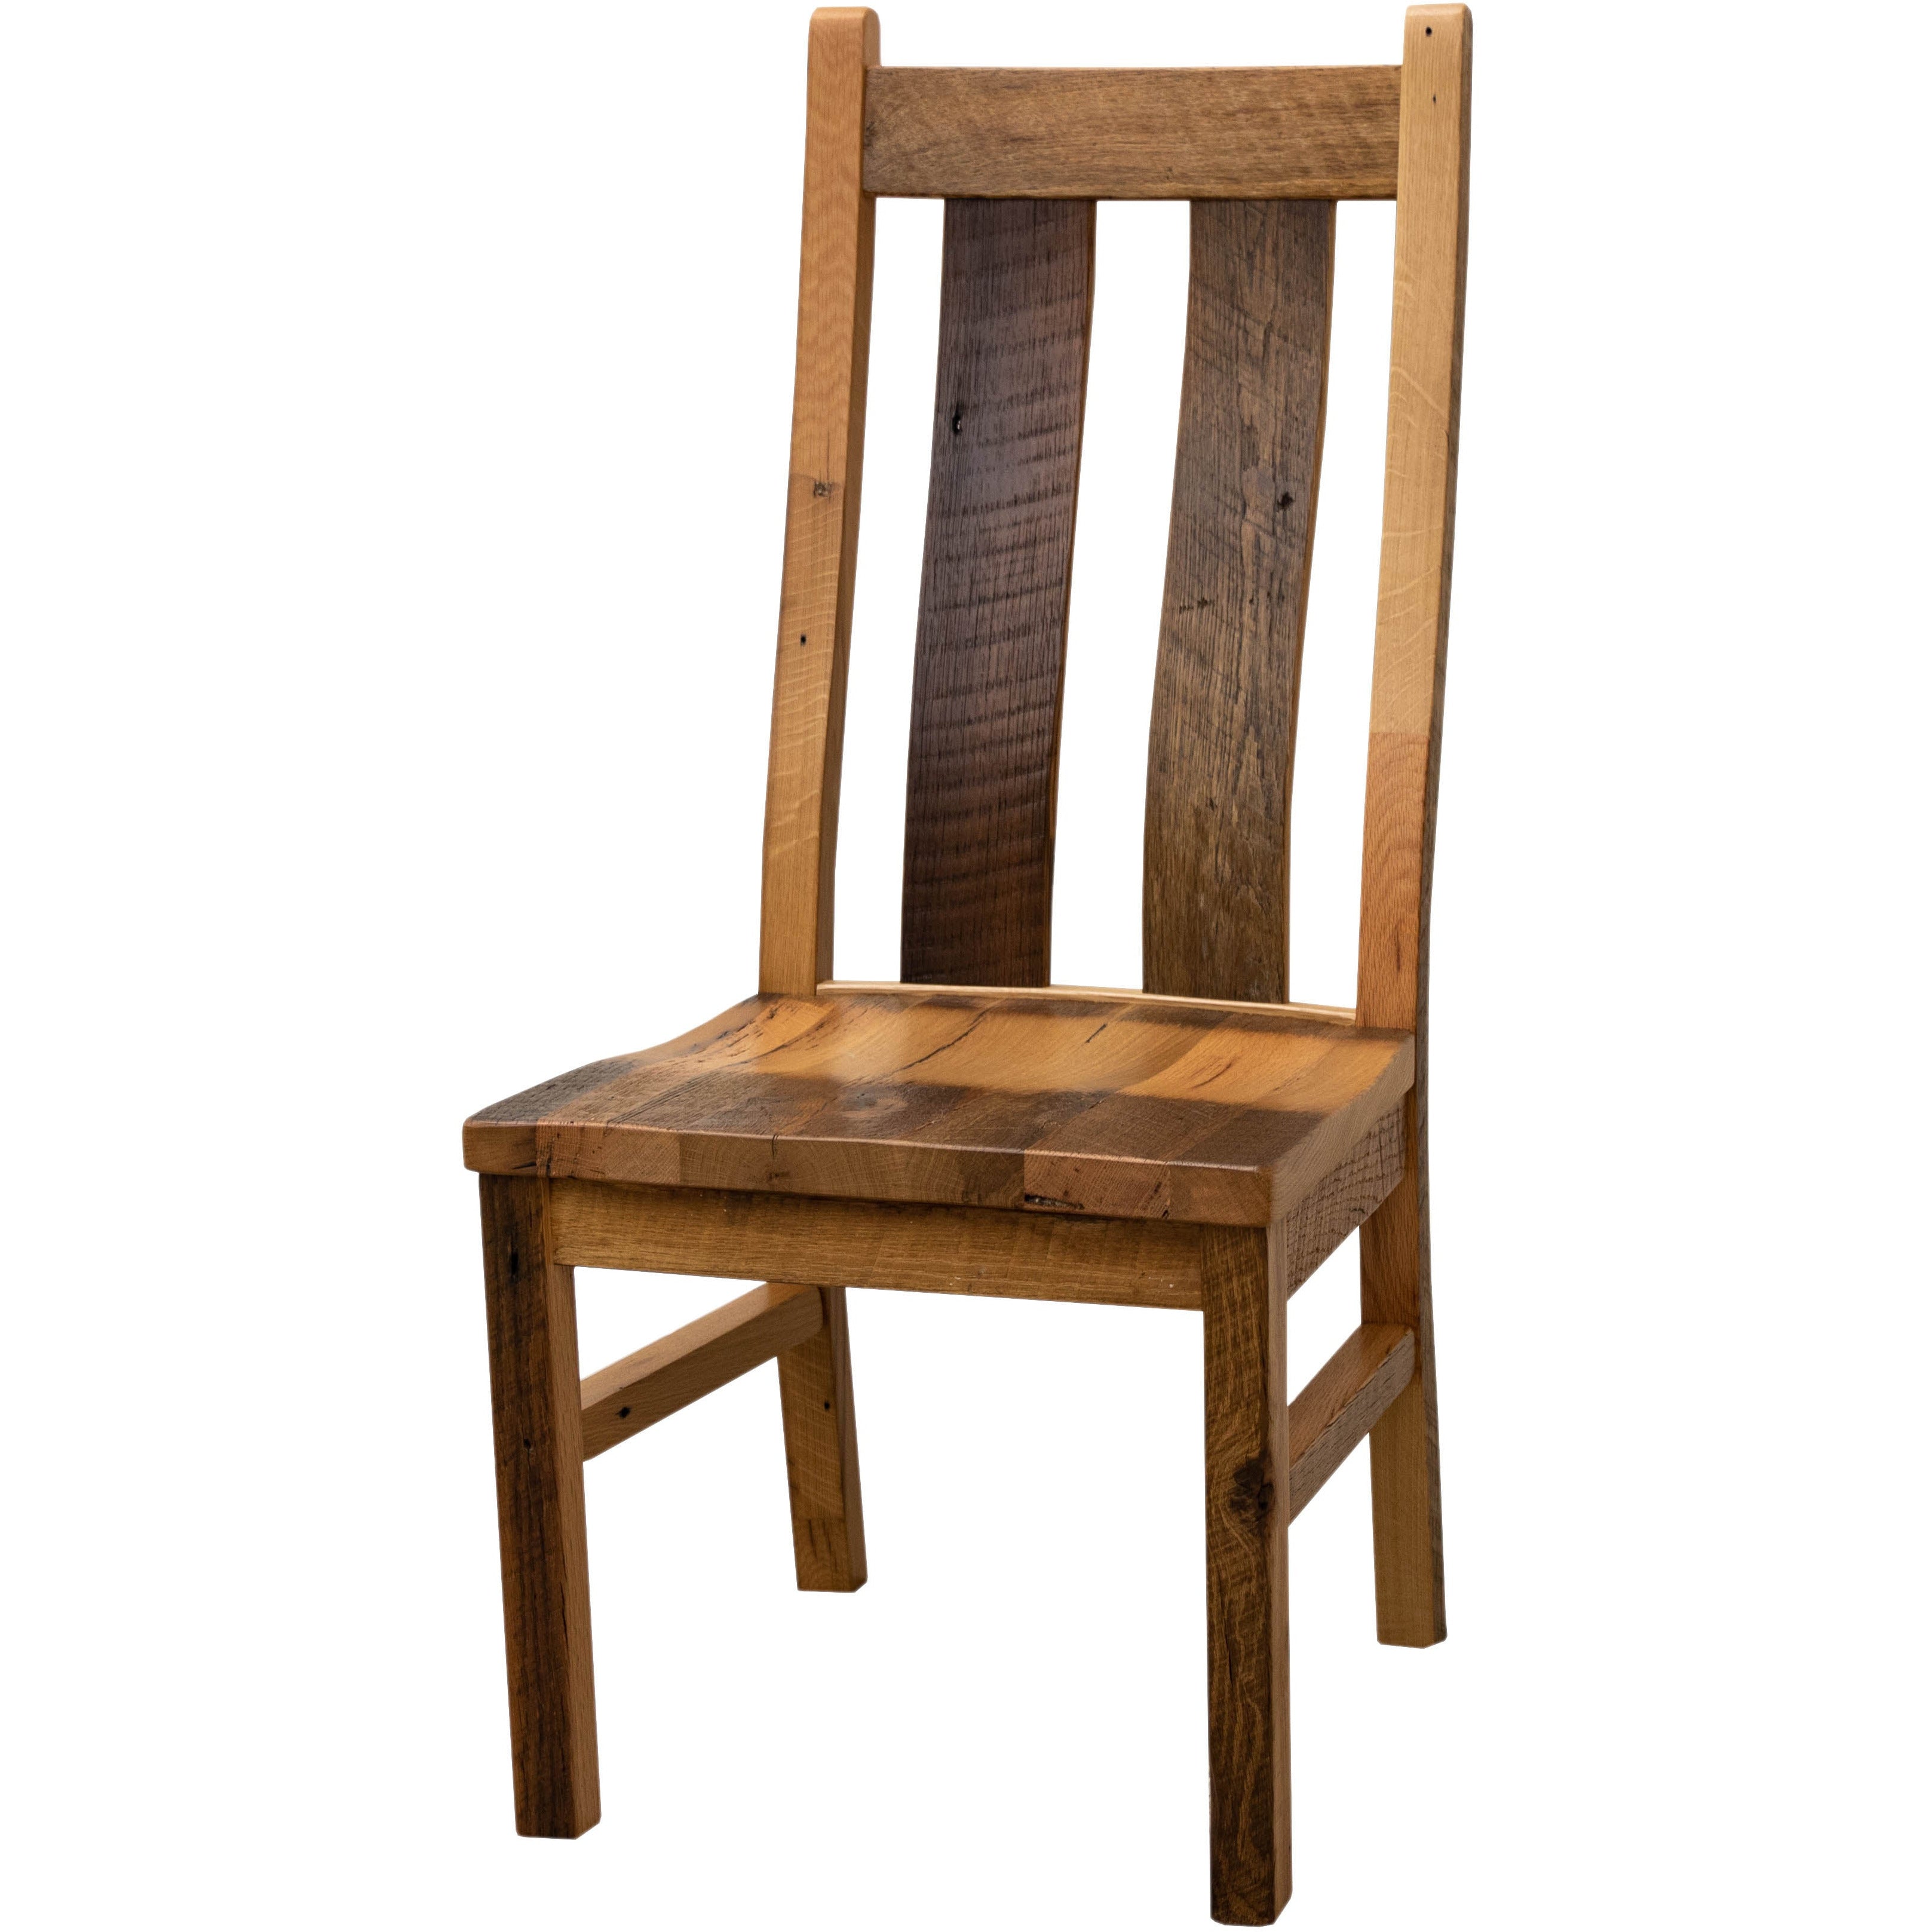 Buckeye Straight Back Chair from DutchCrafters Amish Furniture